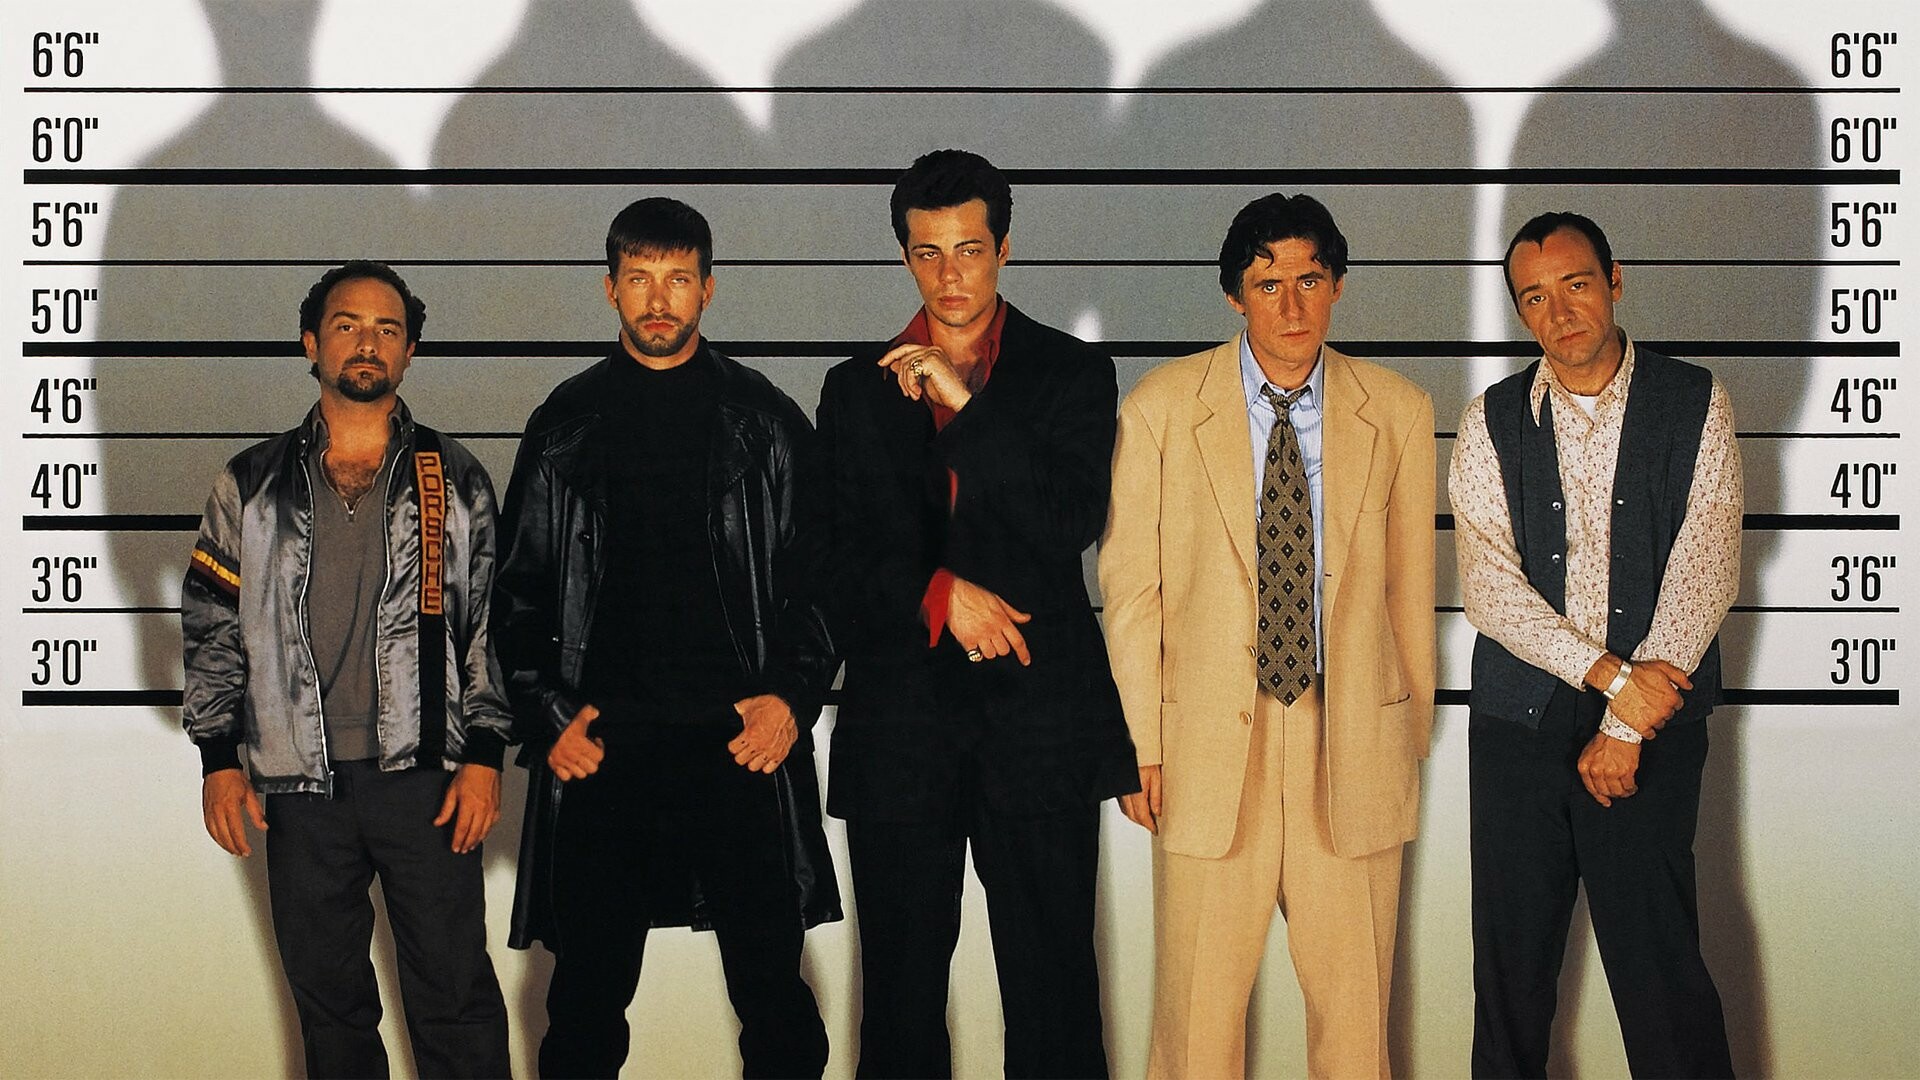 The Usual Suspects: Roger 'Verbal' Kint, Dean Keaton, Michael McManus, Fred Fenster, Todd Hockney. 1920x1080 Full HD Background.